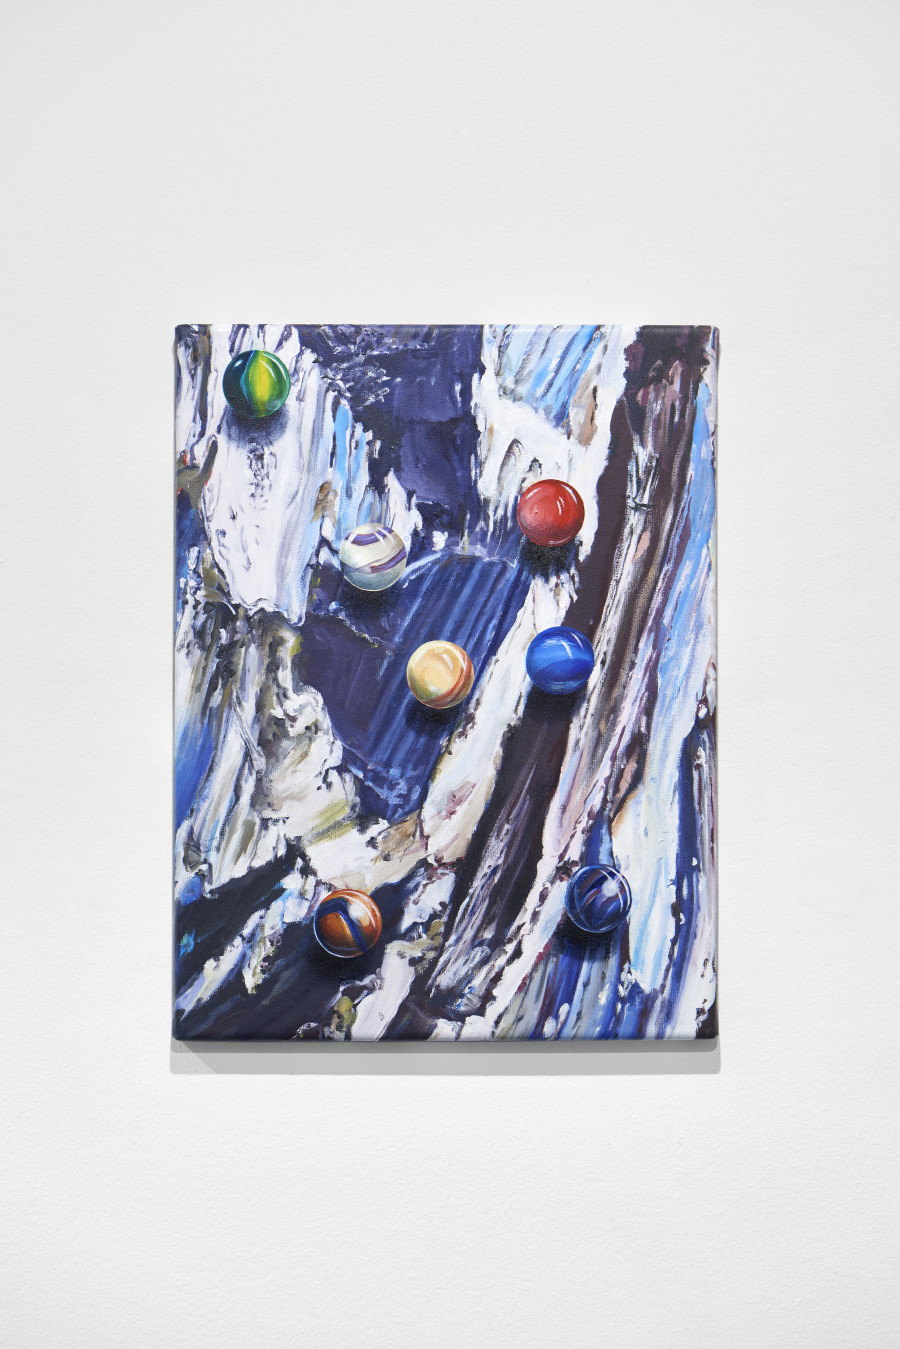 Mathieu Dafflon, Mariana and Diogo’s marbles, 2022. Oil on canvas, 42 x 32 cm, (Ref. DAF010204). Photo: by Philipp Hänger